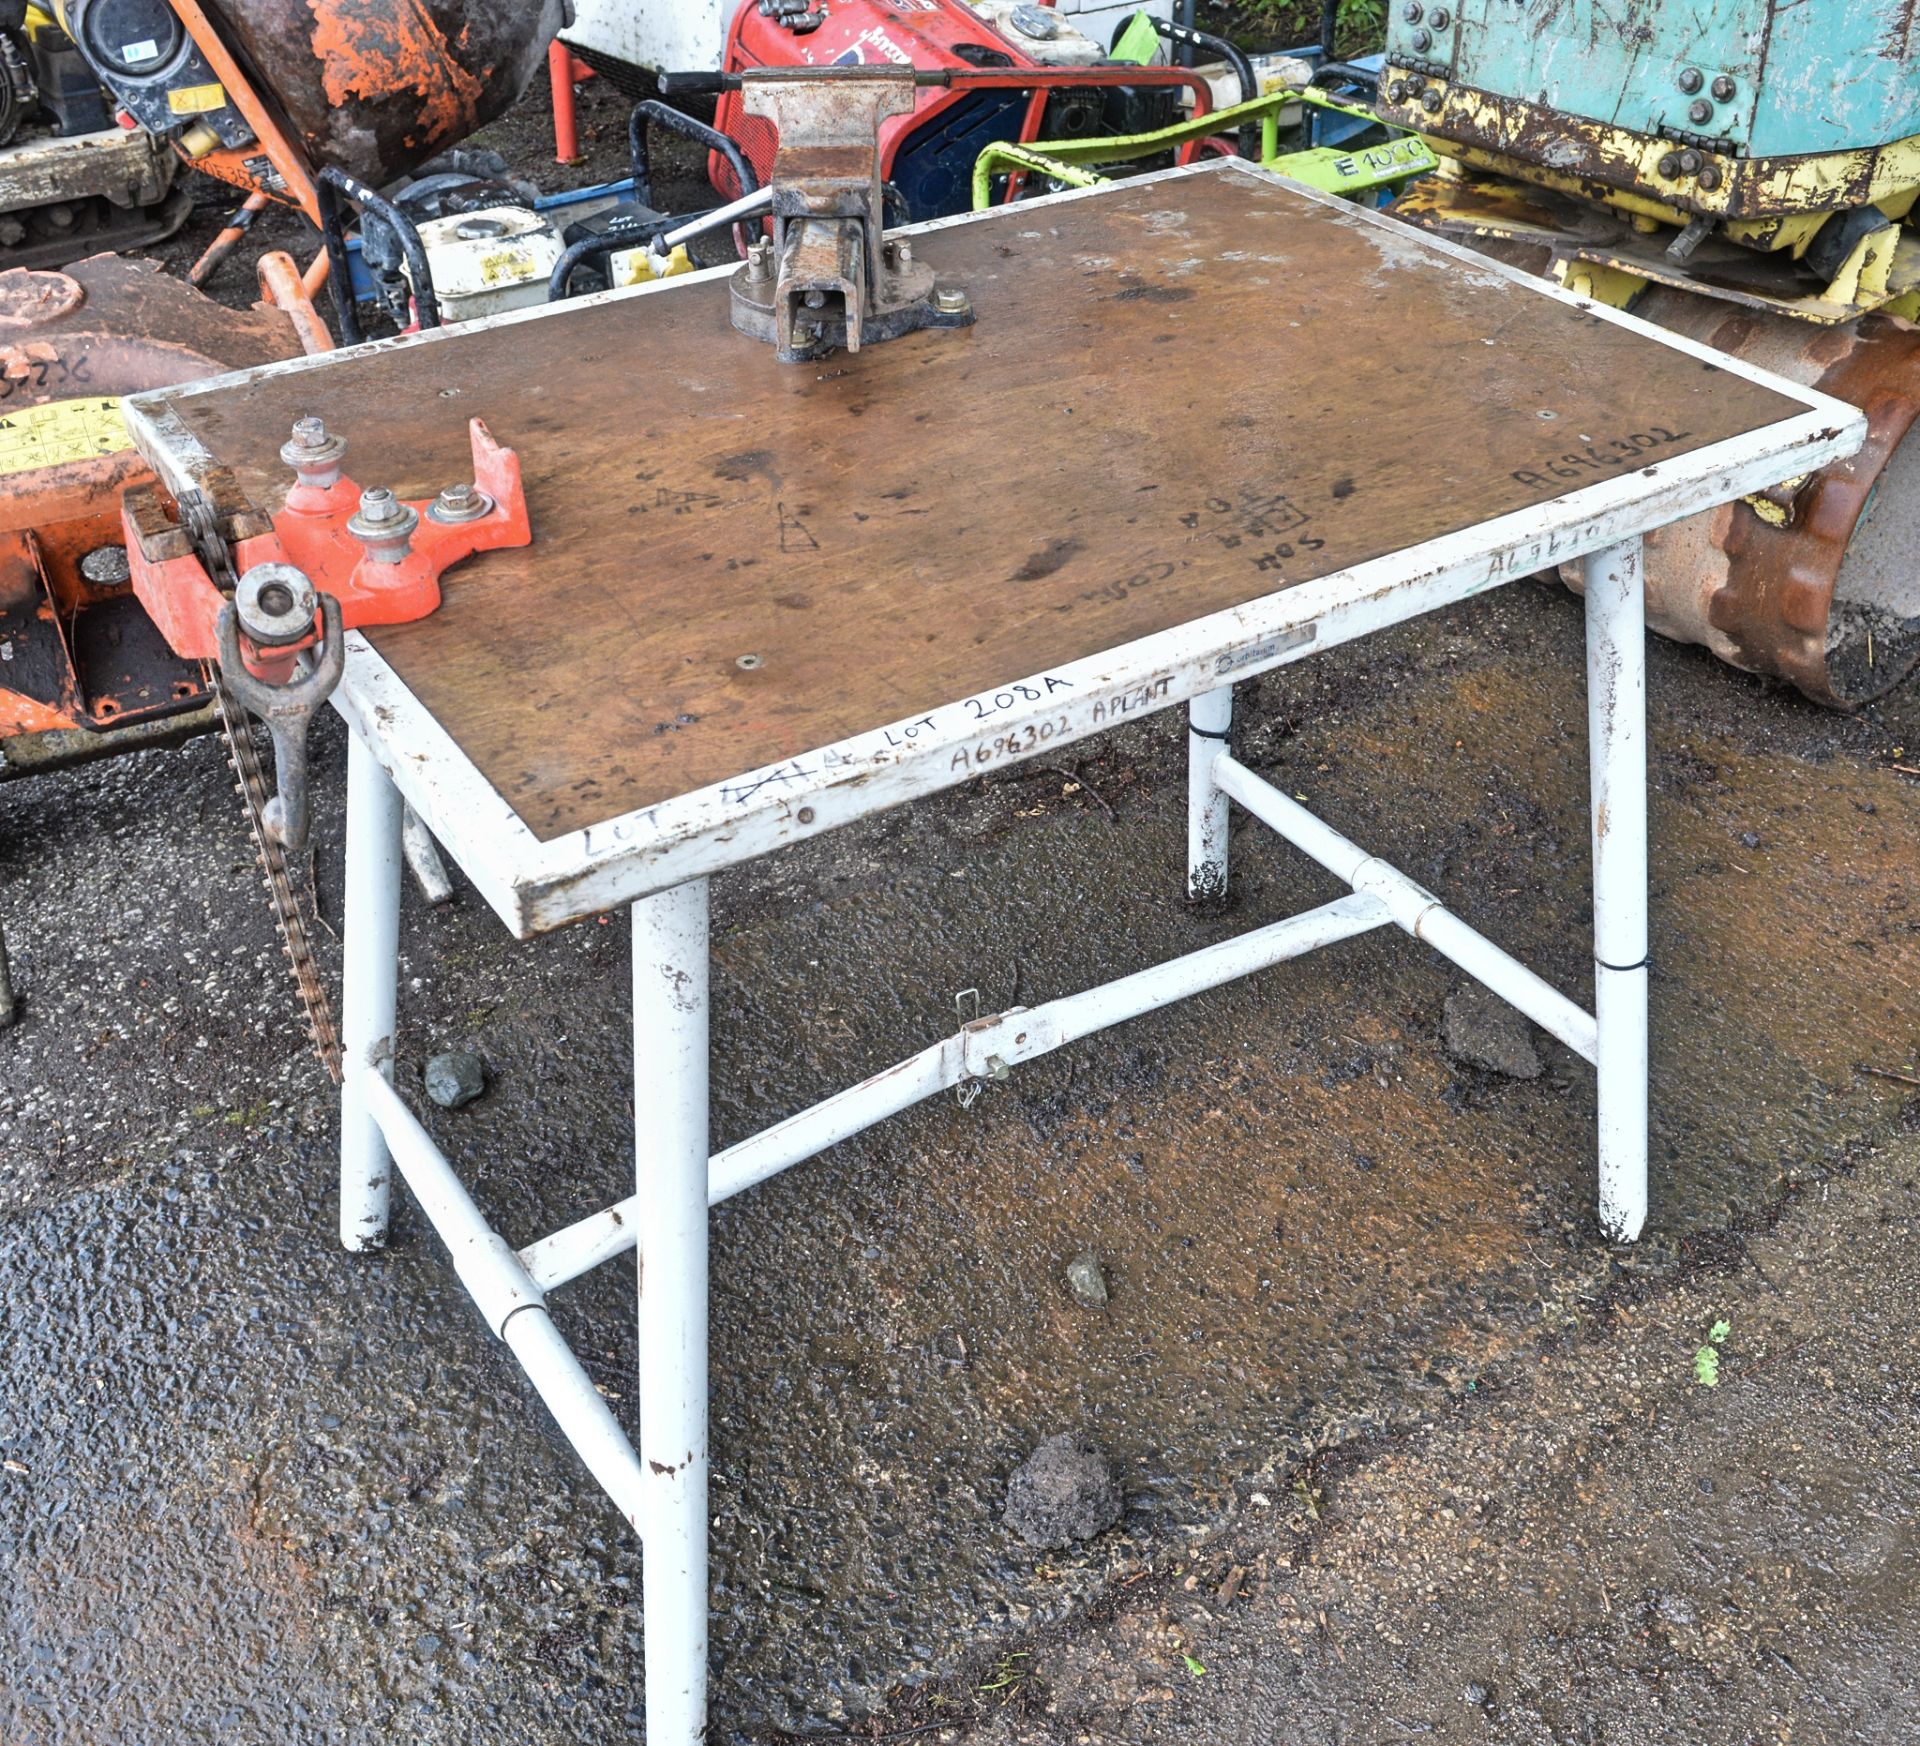 Collapsible work bench  c/w bench vice and pipe vice  C/O